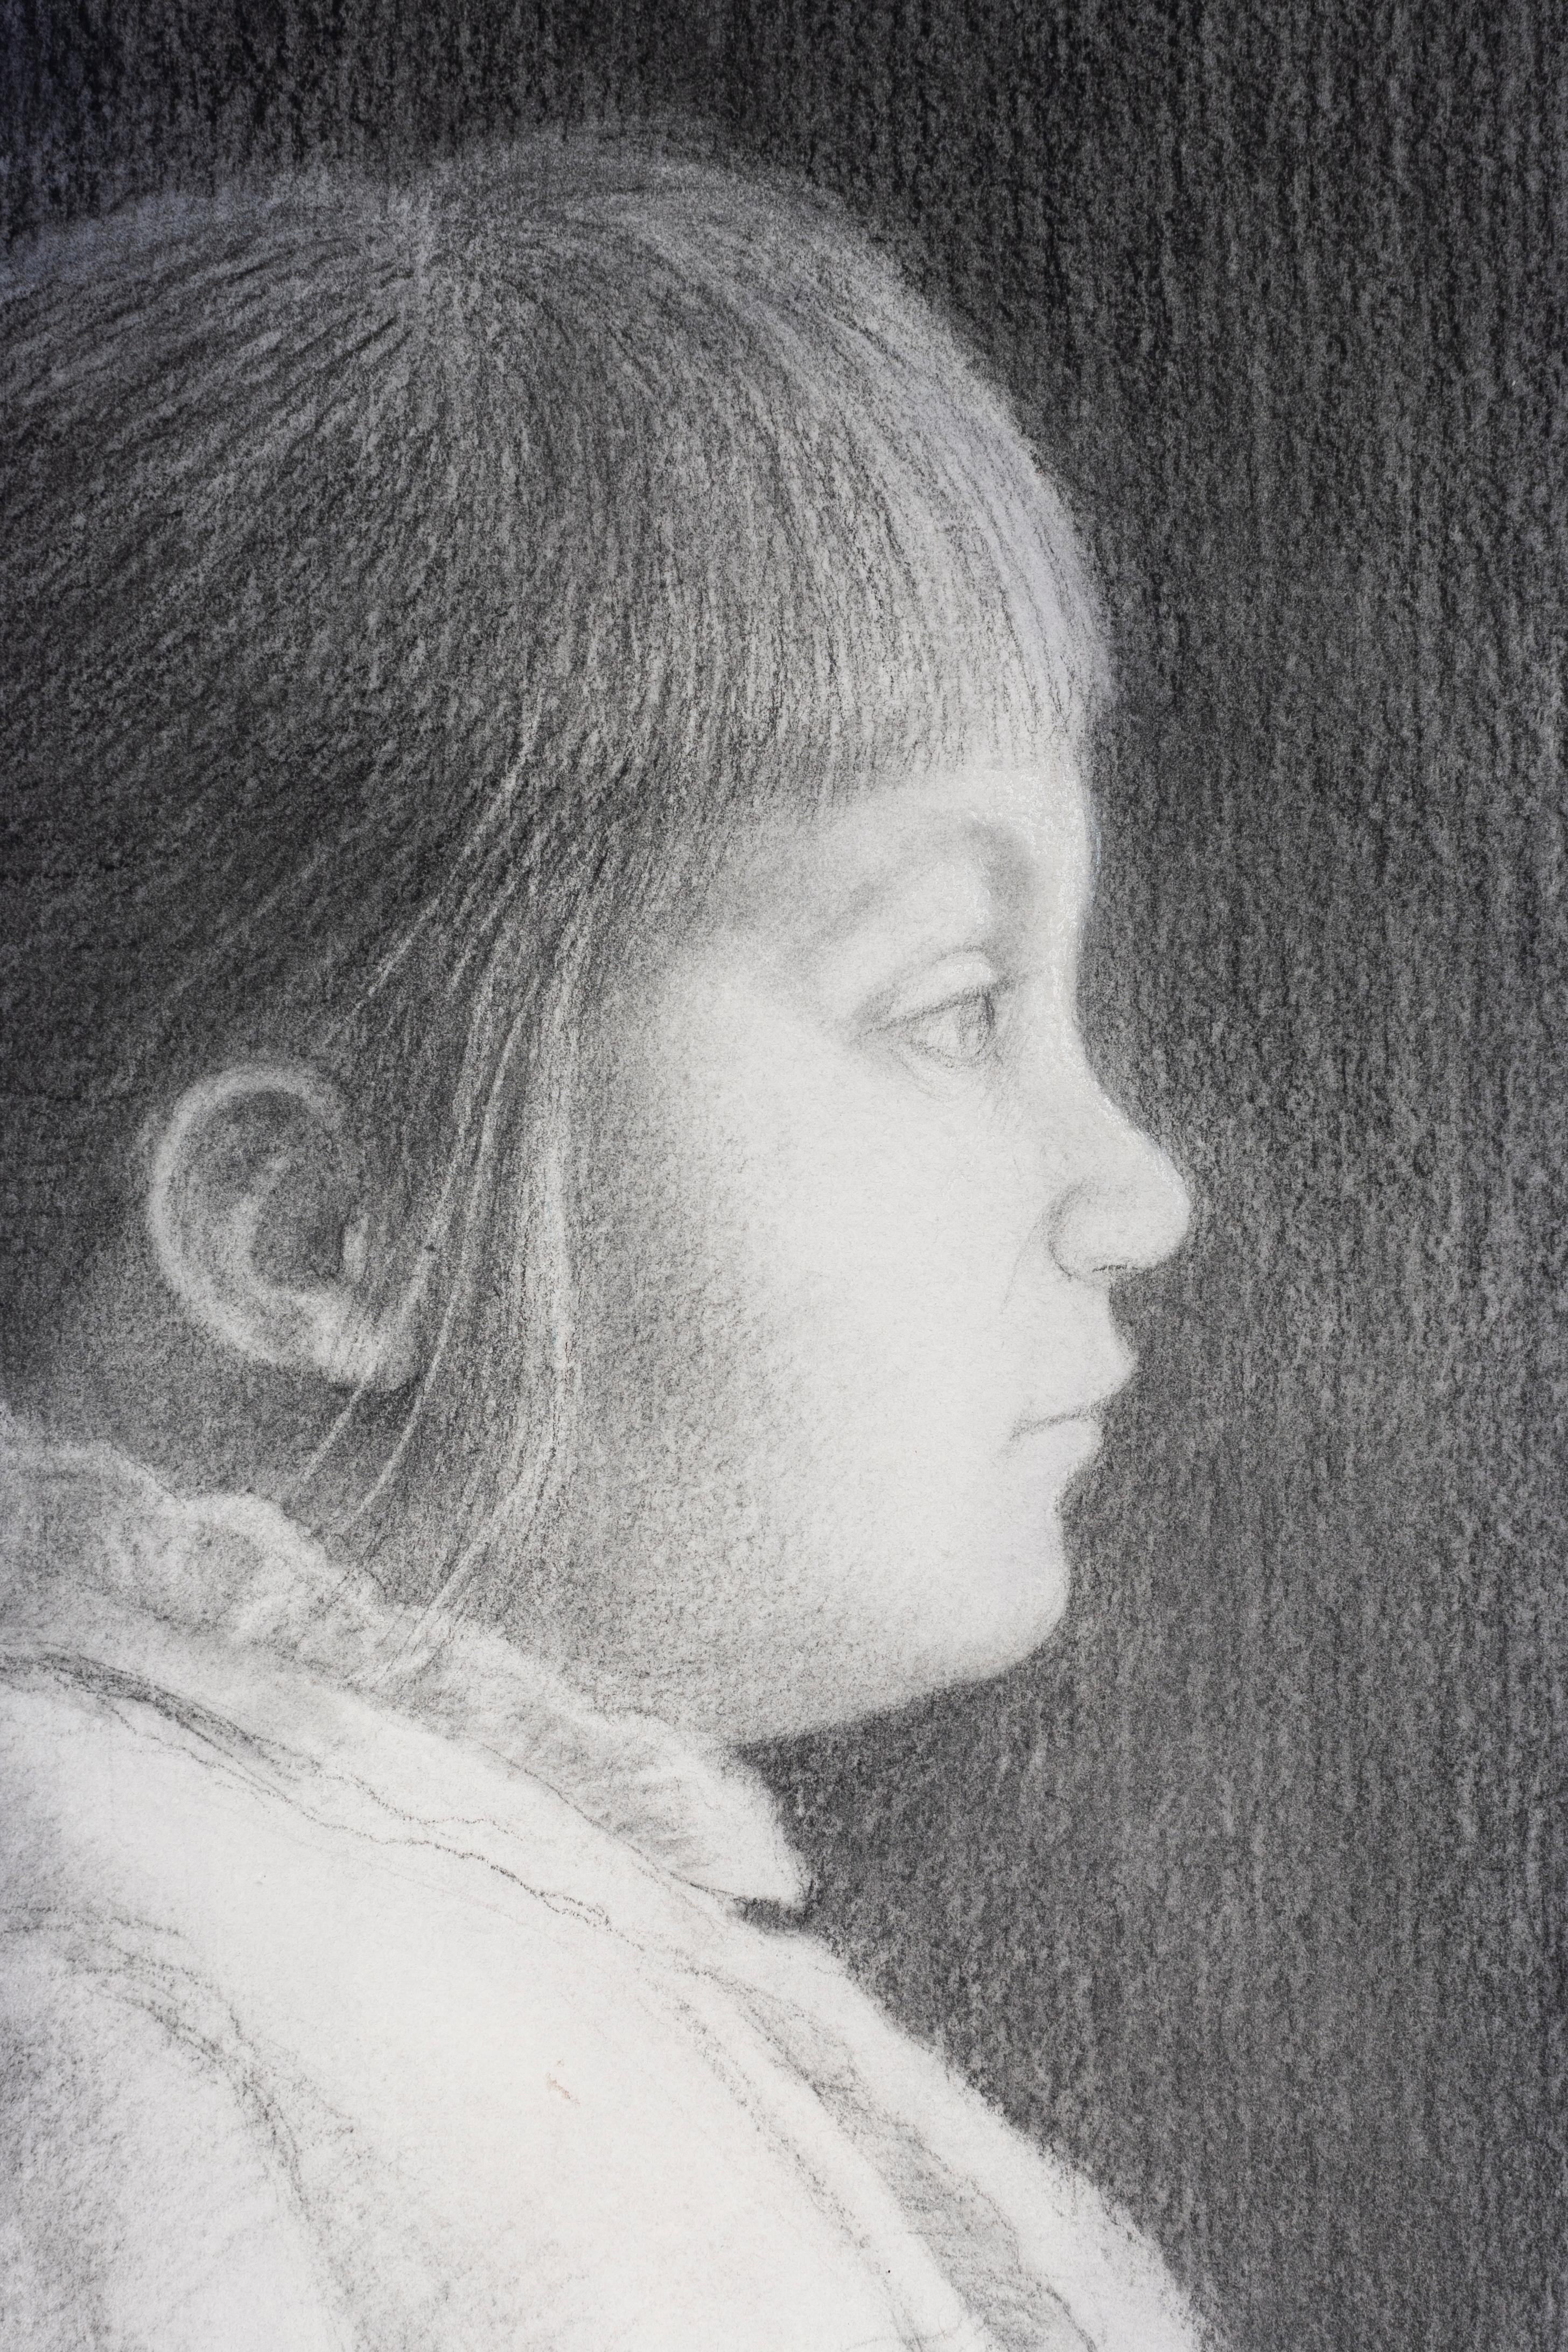 Child in Profile - Art by Jerry Berneche